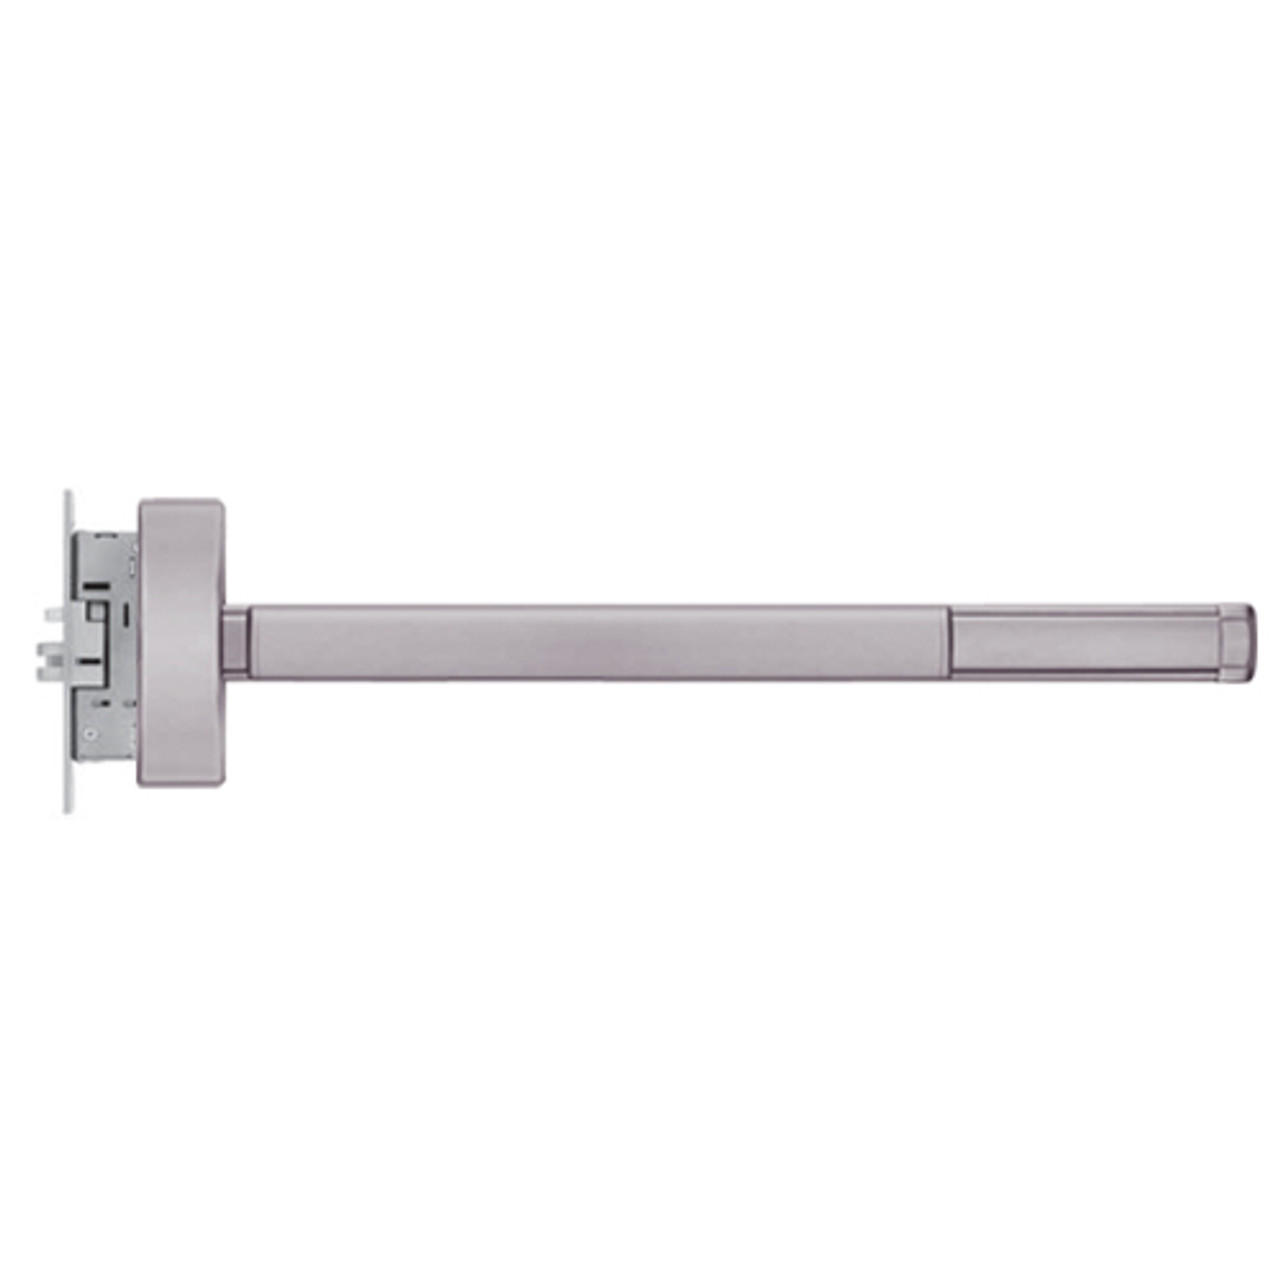 DEFL2303-LHR-630-48 PHI 2300 Series Fire Rated Apex Mortise Exit Device with Delayed Egress Prepped for Key Retracts Latchbolt in Satin Stainless Steel Finish